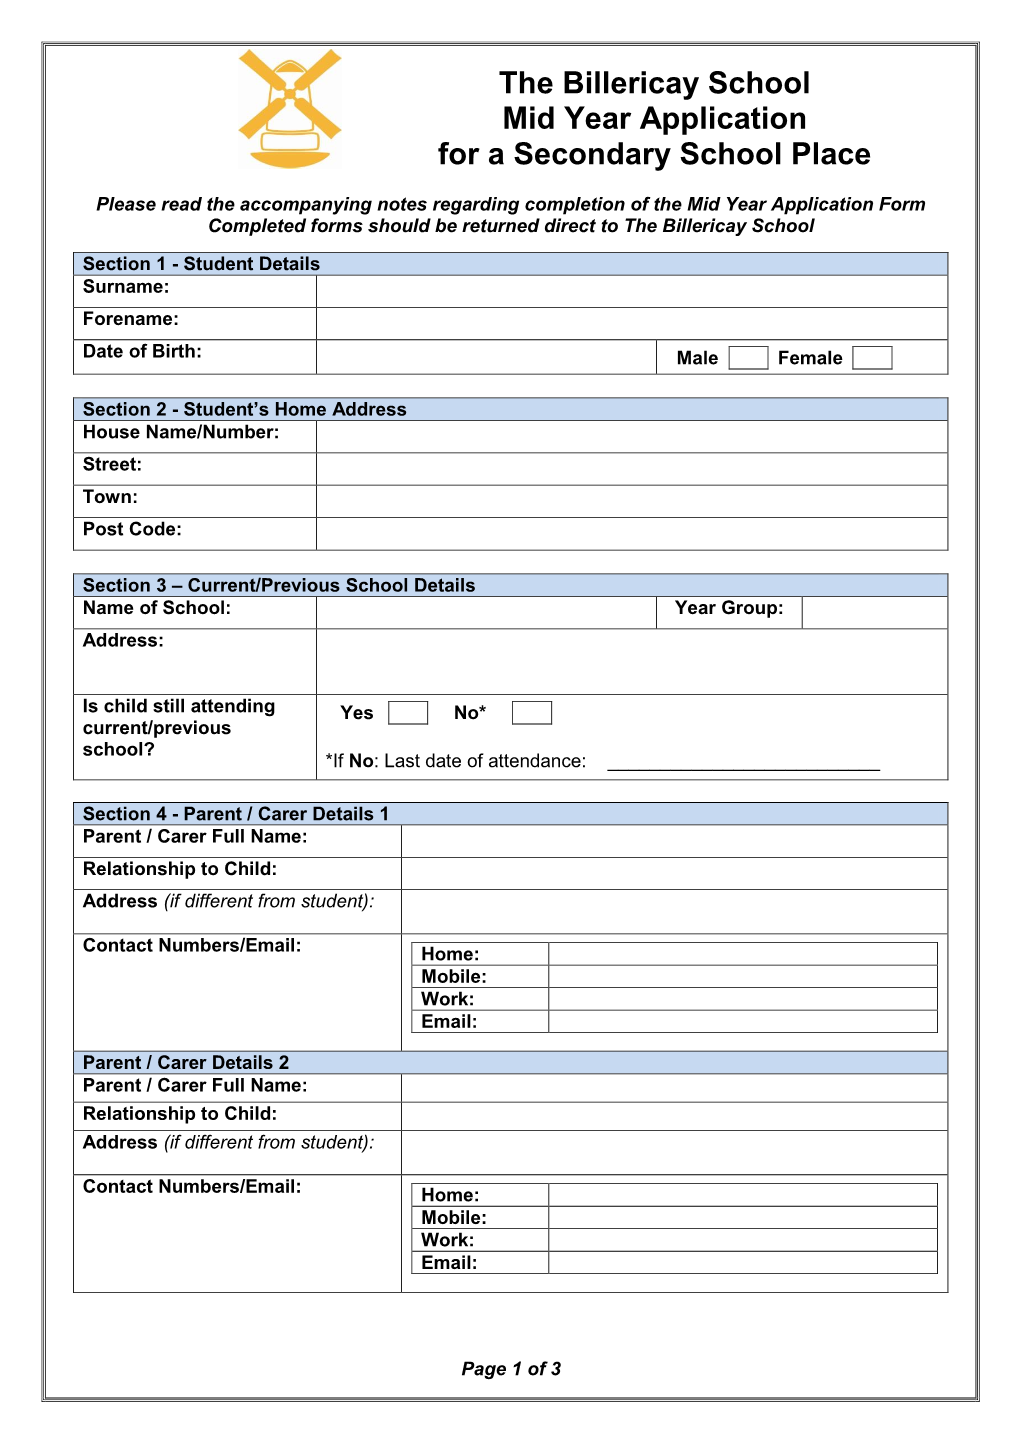 The Billericay School Mid Year Application for a Secondary School